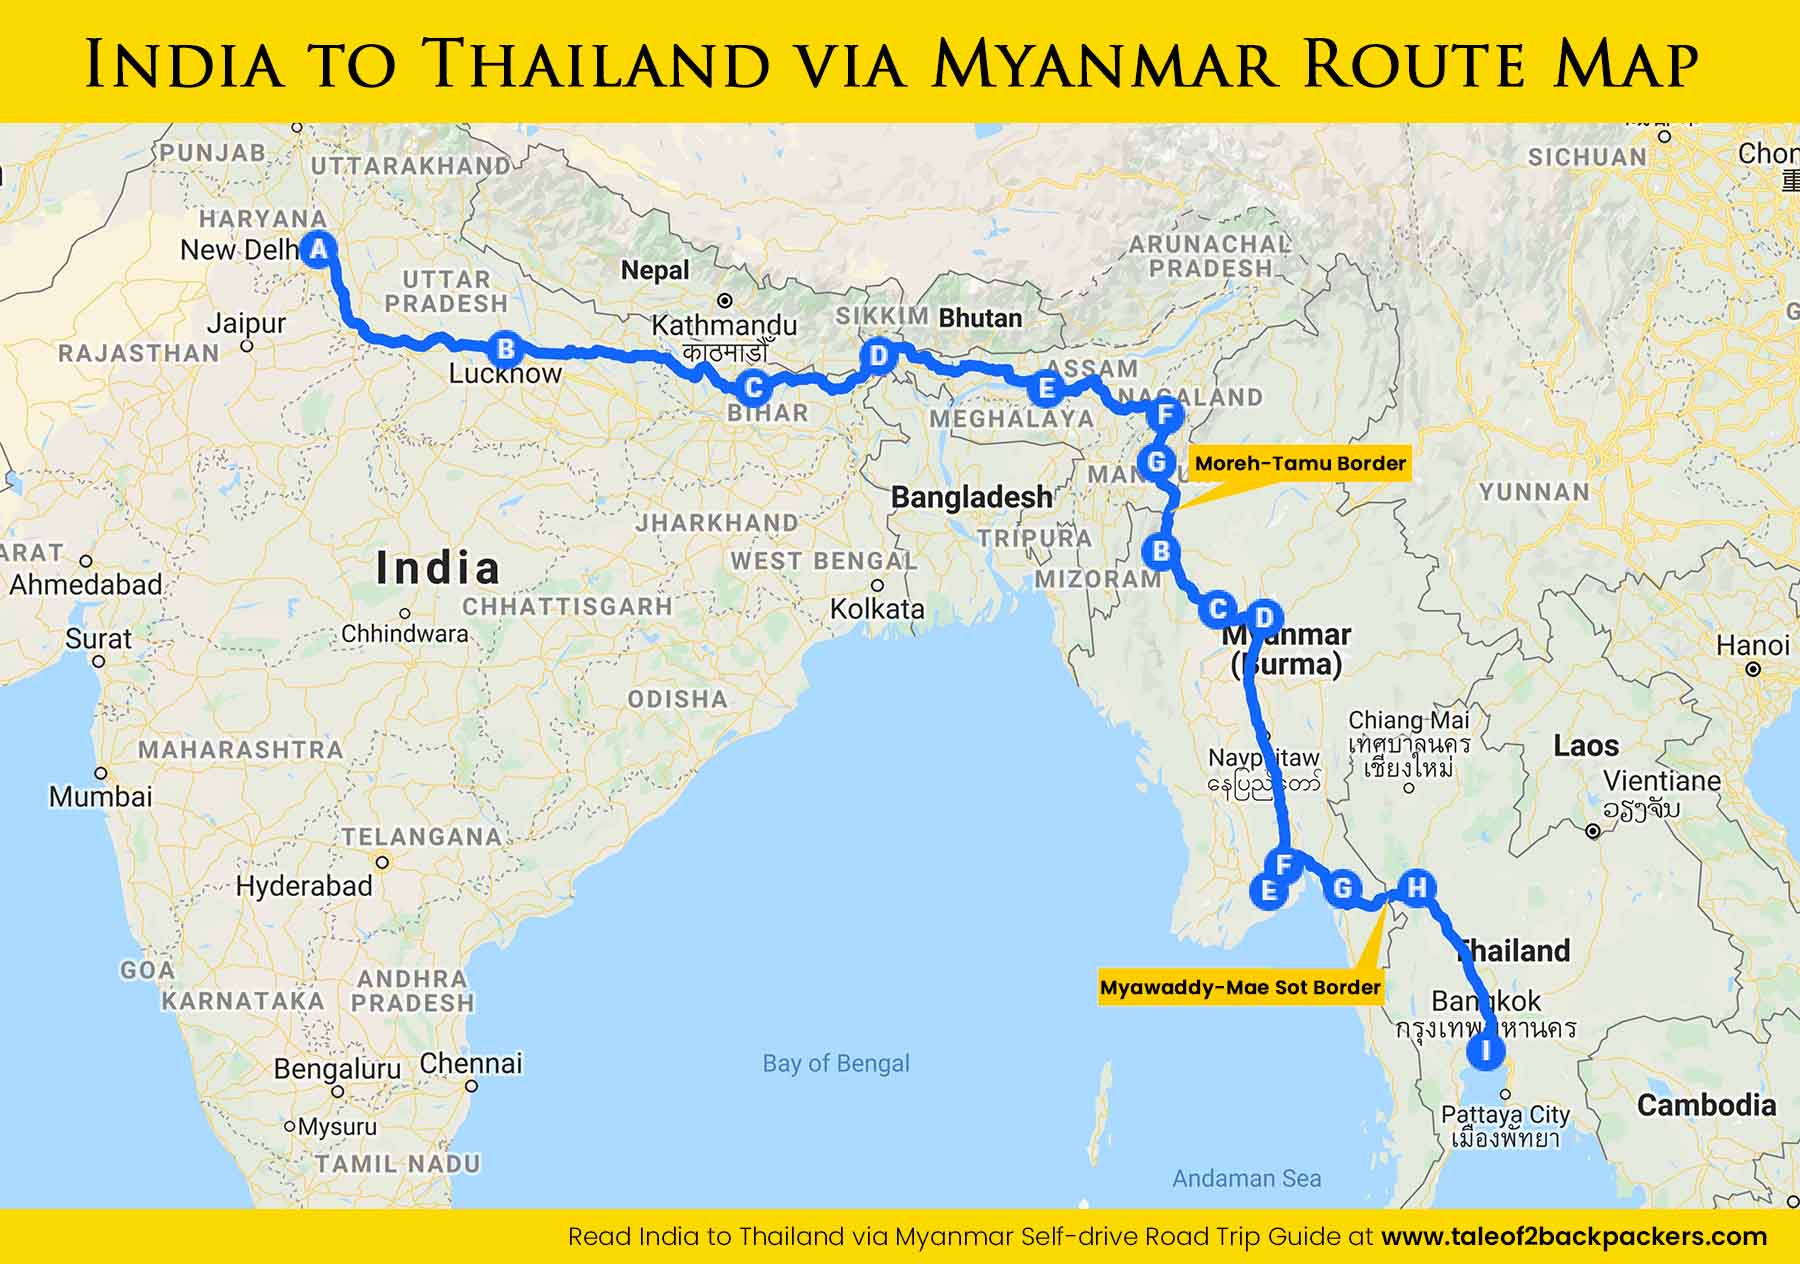 India to Thailand by Road via Myanmar in Own Car or Motorbike